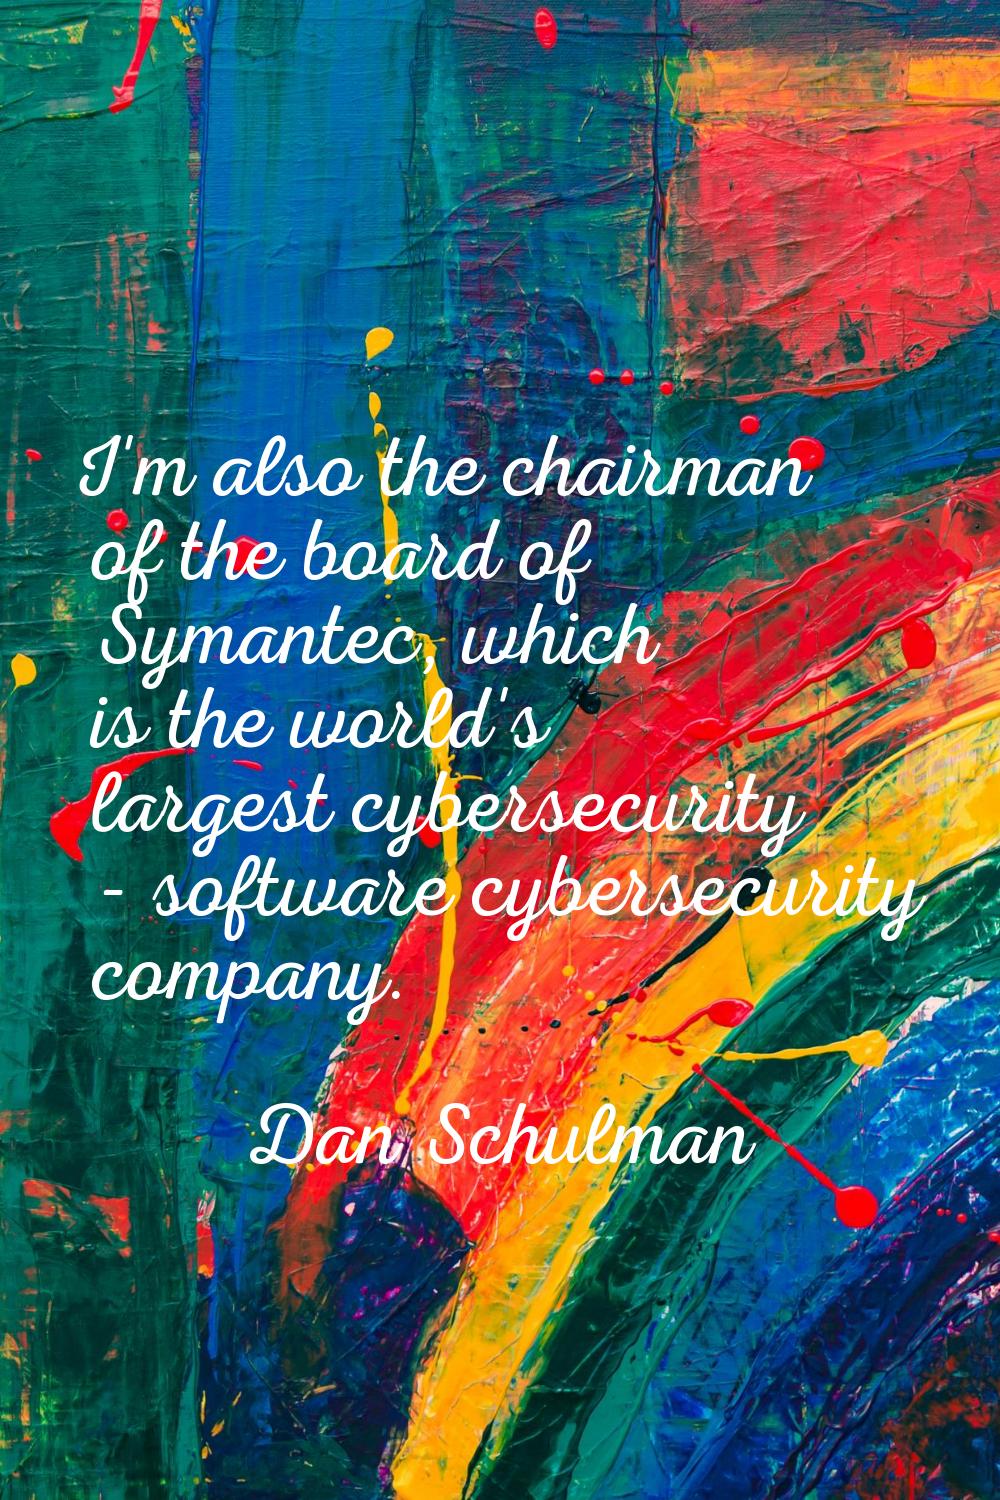 I'm also the chairman of the board of Symantec, which is the world's largest cybersecurity - softwa